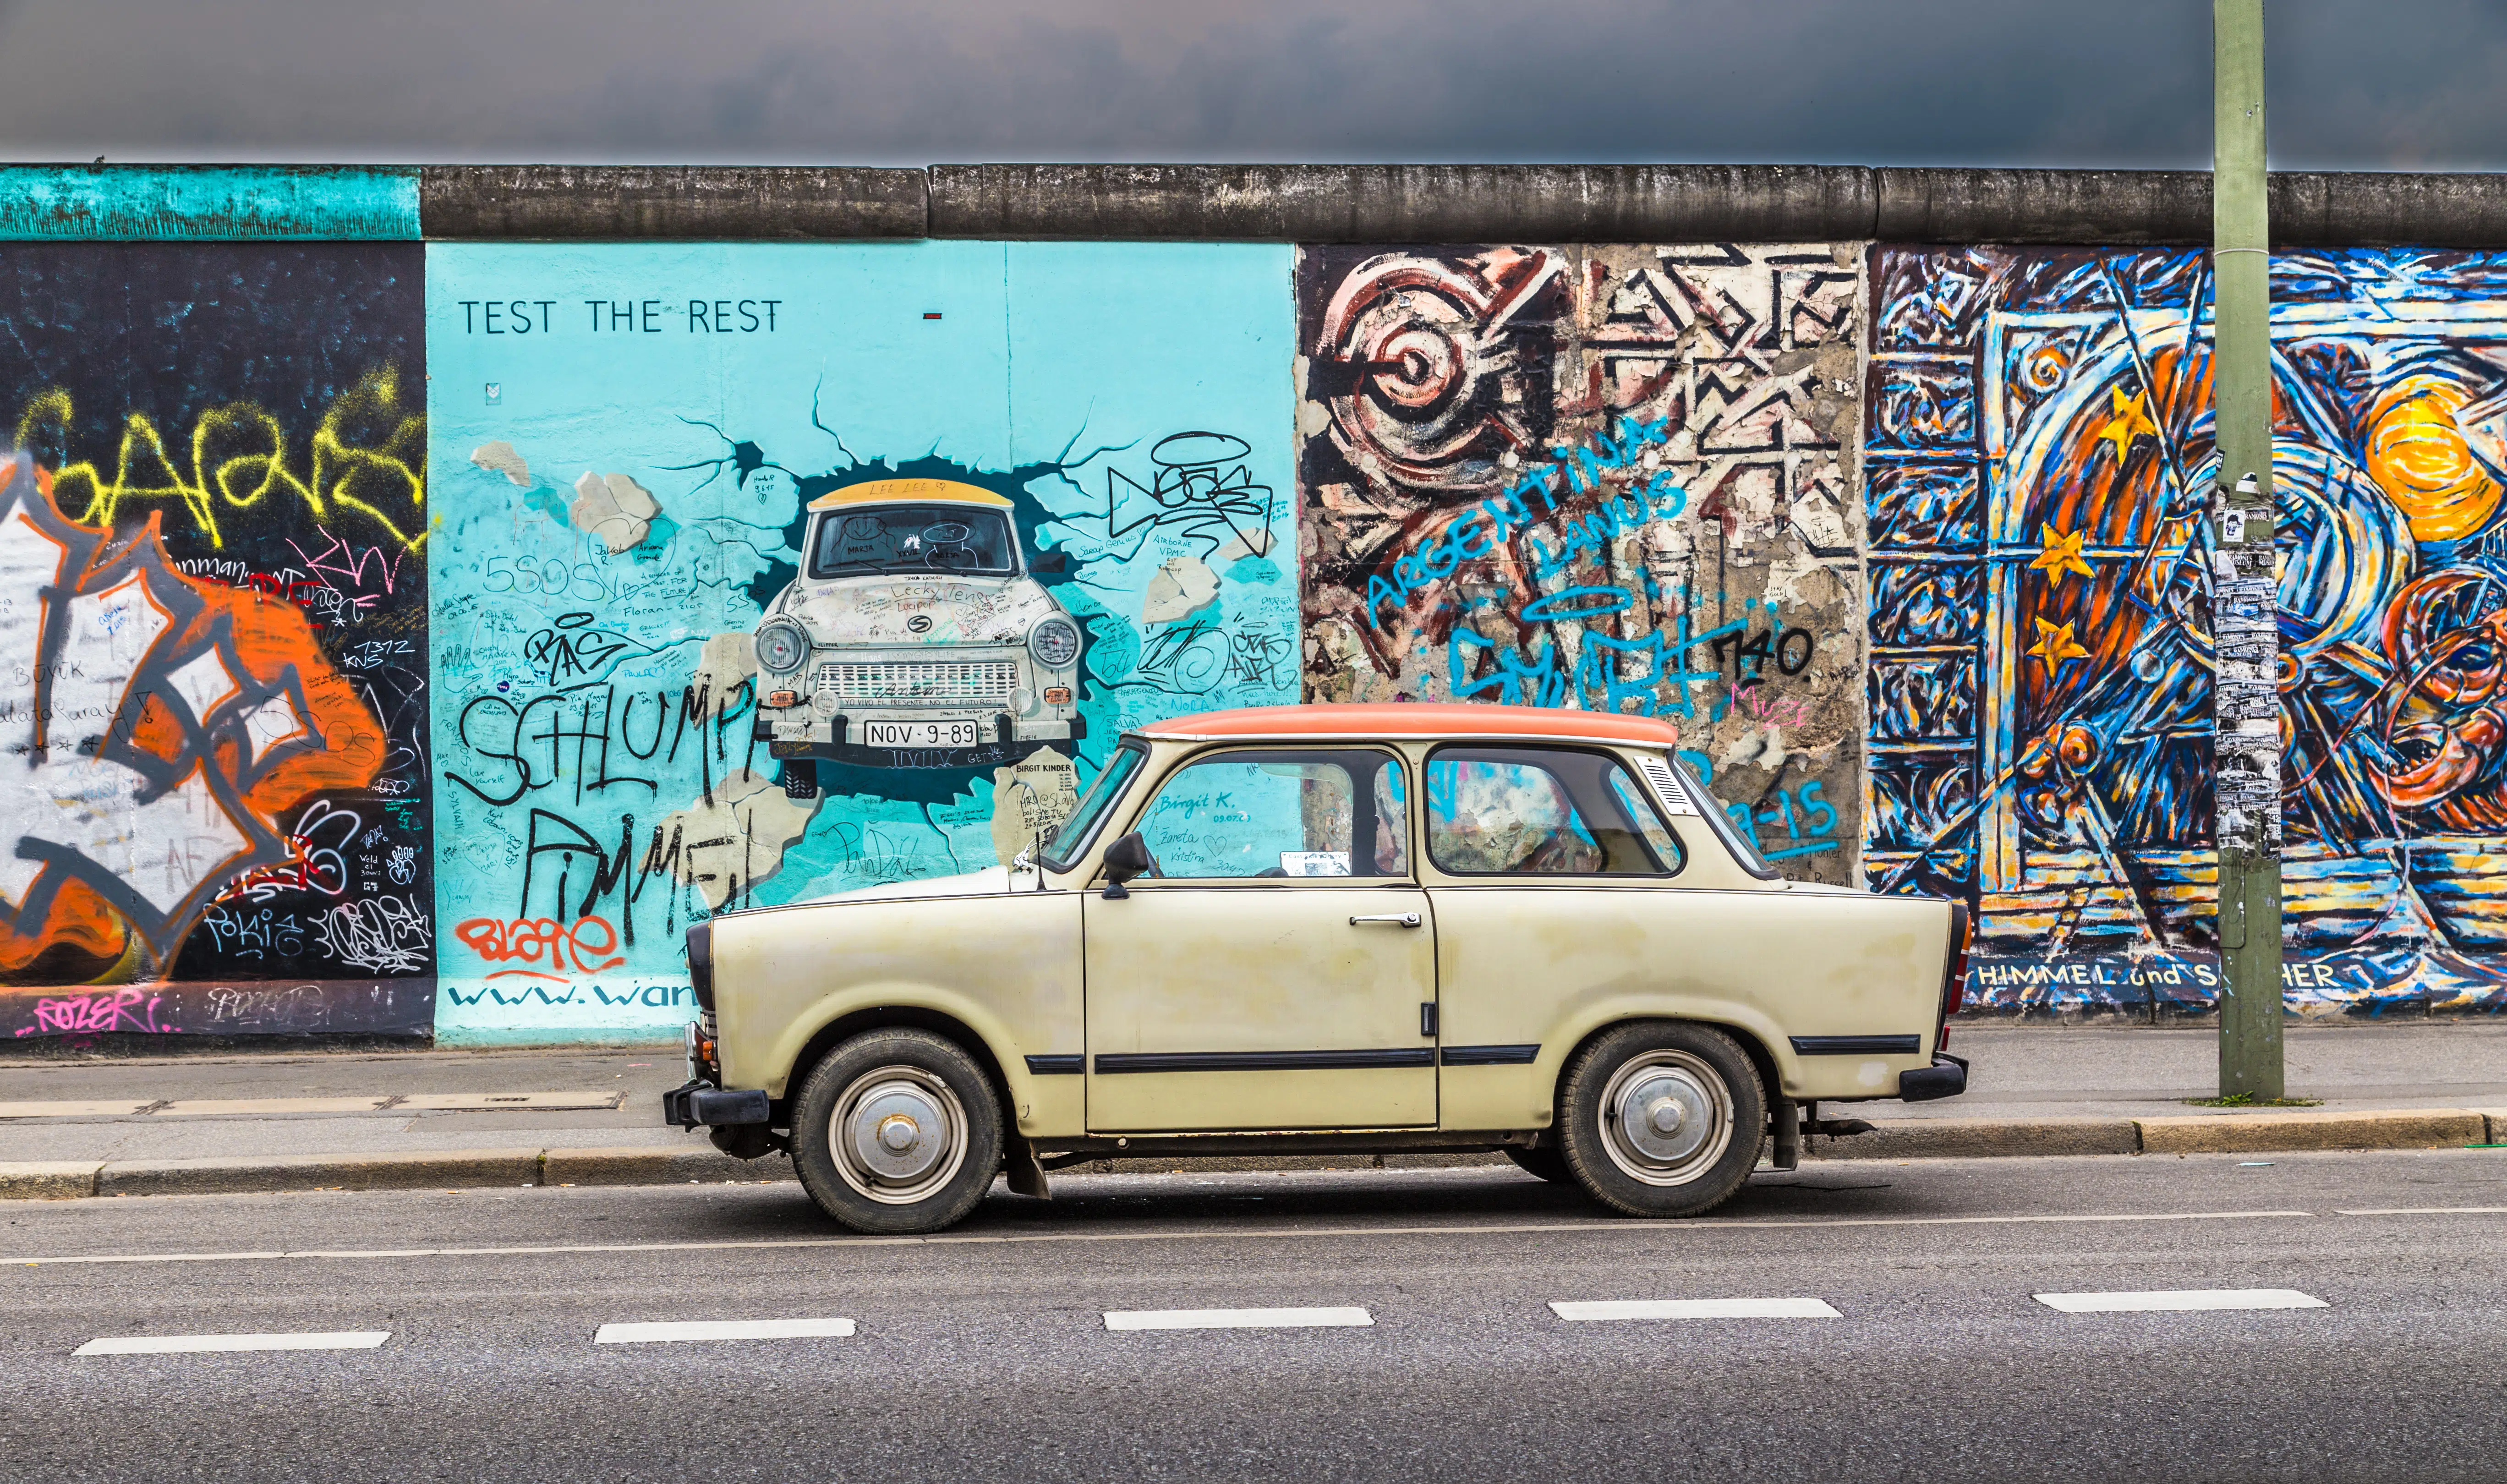 Berlin Wall at East Side Gallery with an old Trabant, Germany